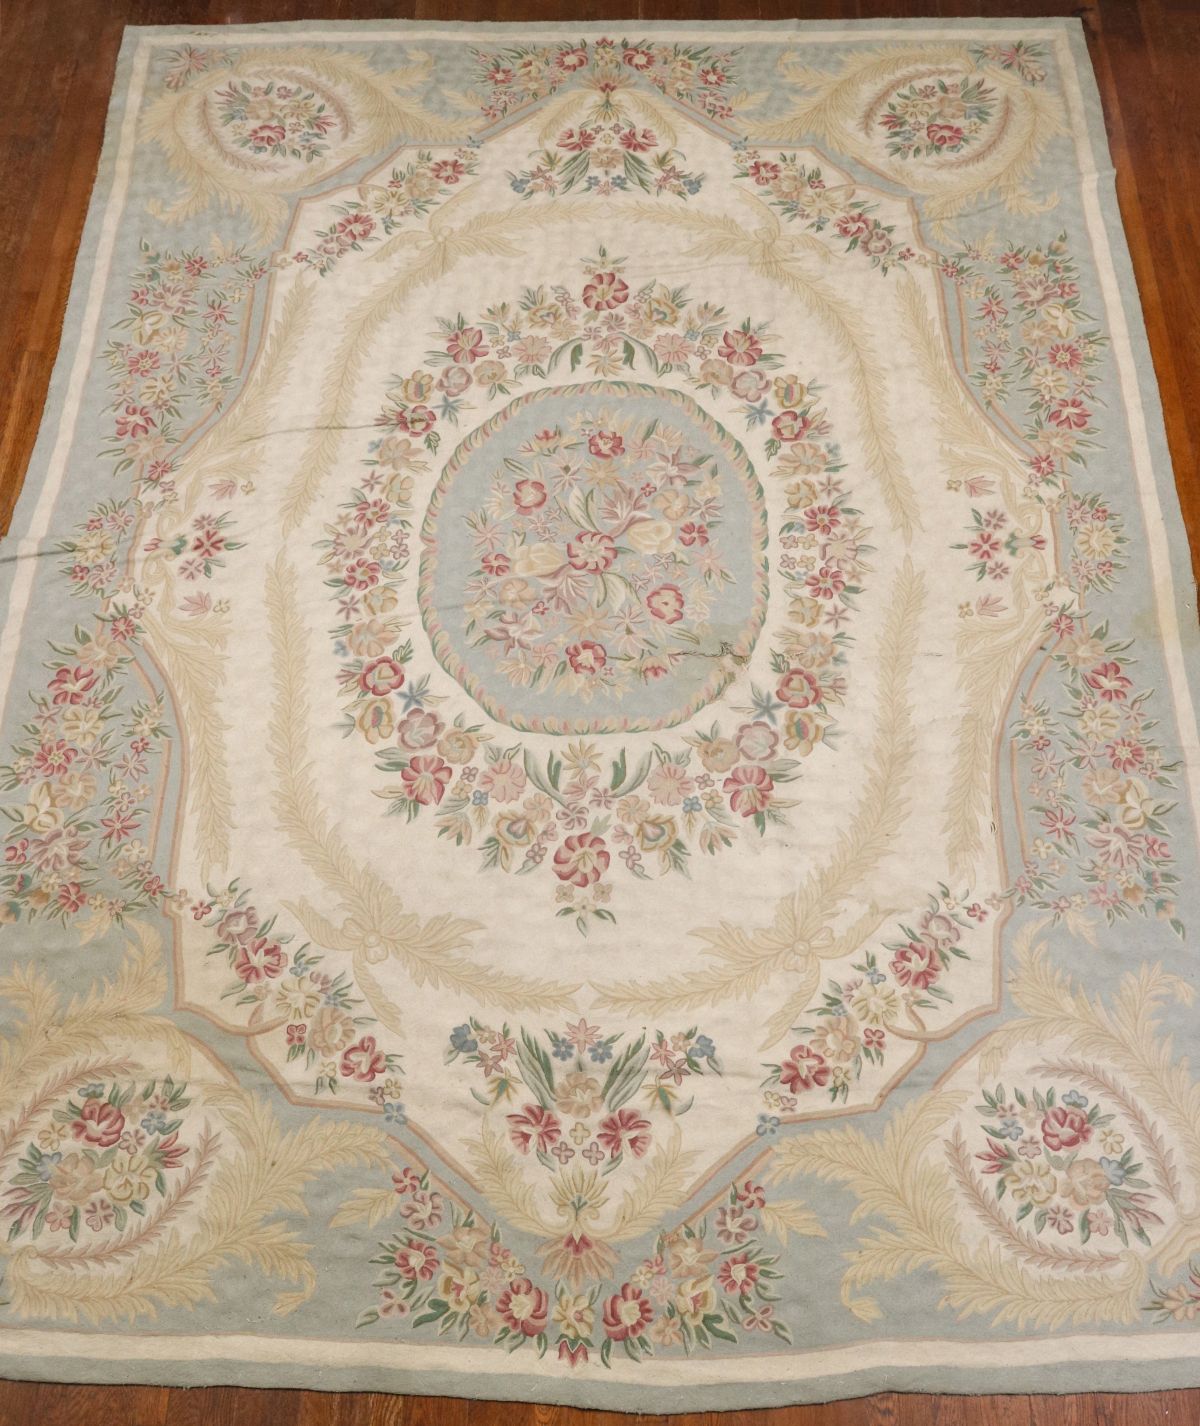 A 20TH C. FRENCH NEEDLEPOINT RUG AS FOUND